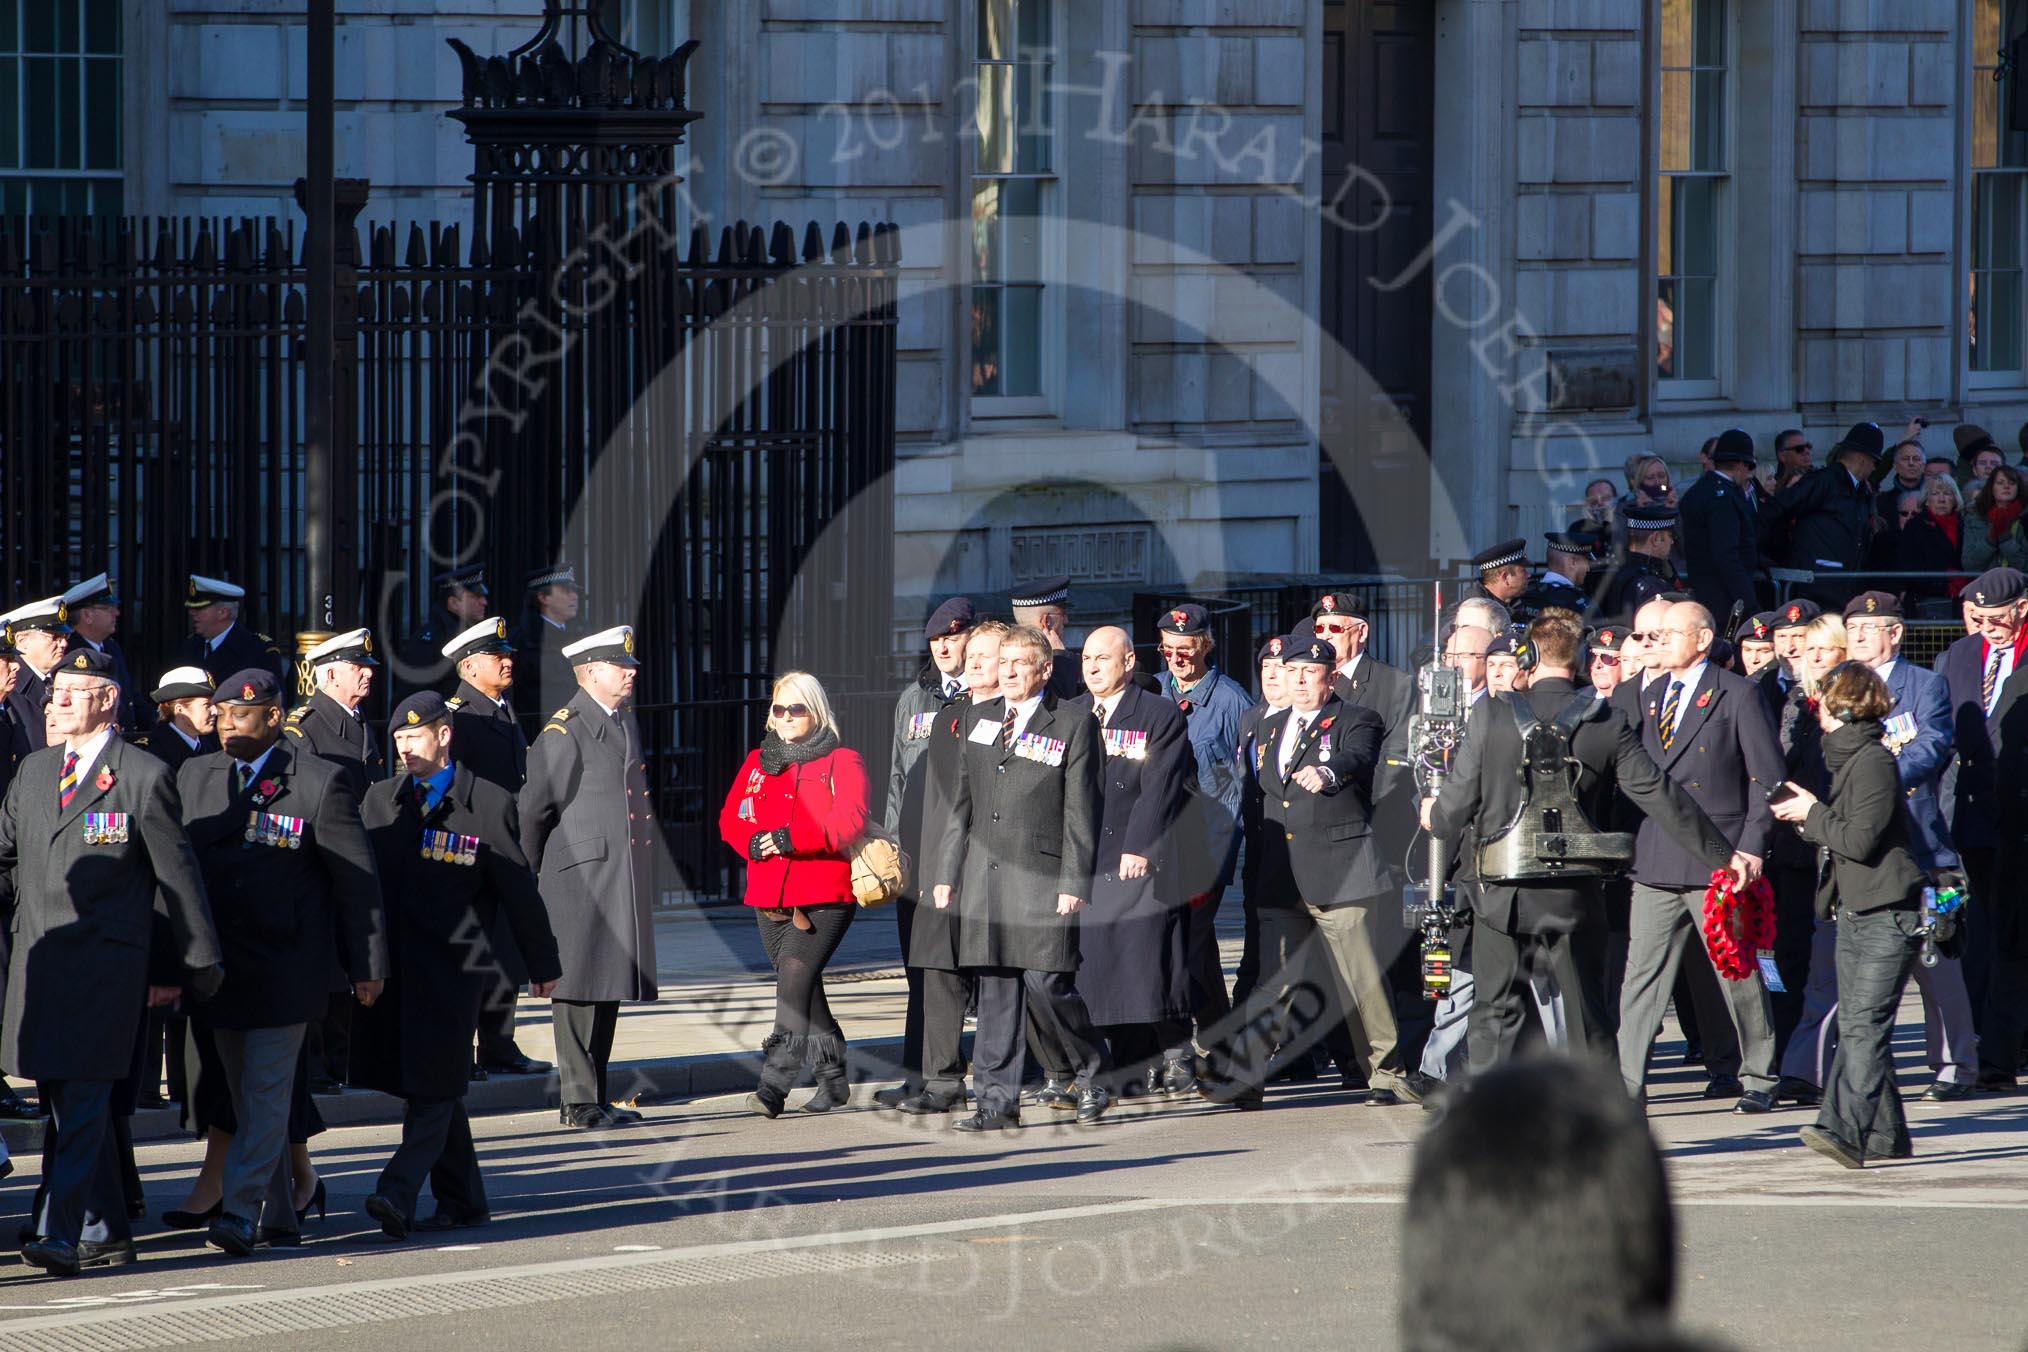 Remembrance Sunday 2012 Cenotaph March Past: Group B1, Royal Army Medical Corps Association and B2, Royal Electrical & Mechanical Engineers Association..
Whitehall, Cenotaph,
London SW1,

United Kingdom,
on 11 November 2012 at 11:54, image #806